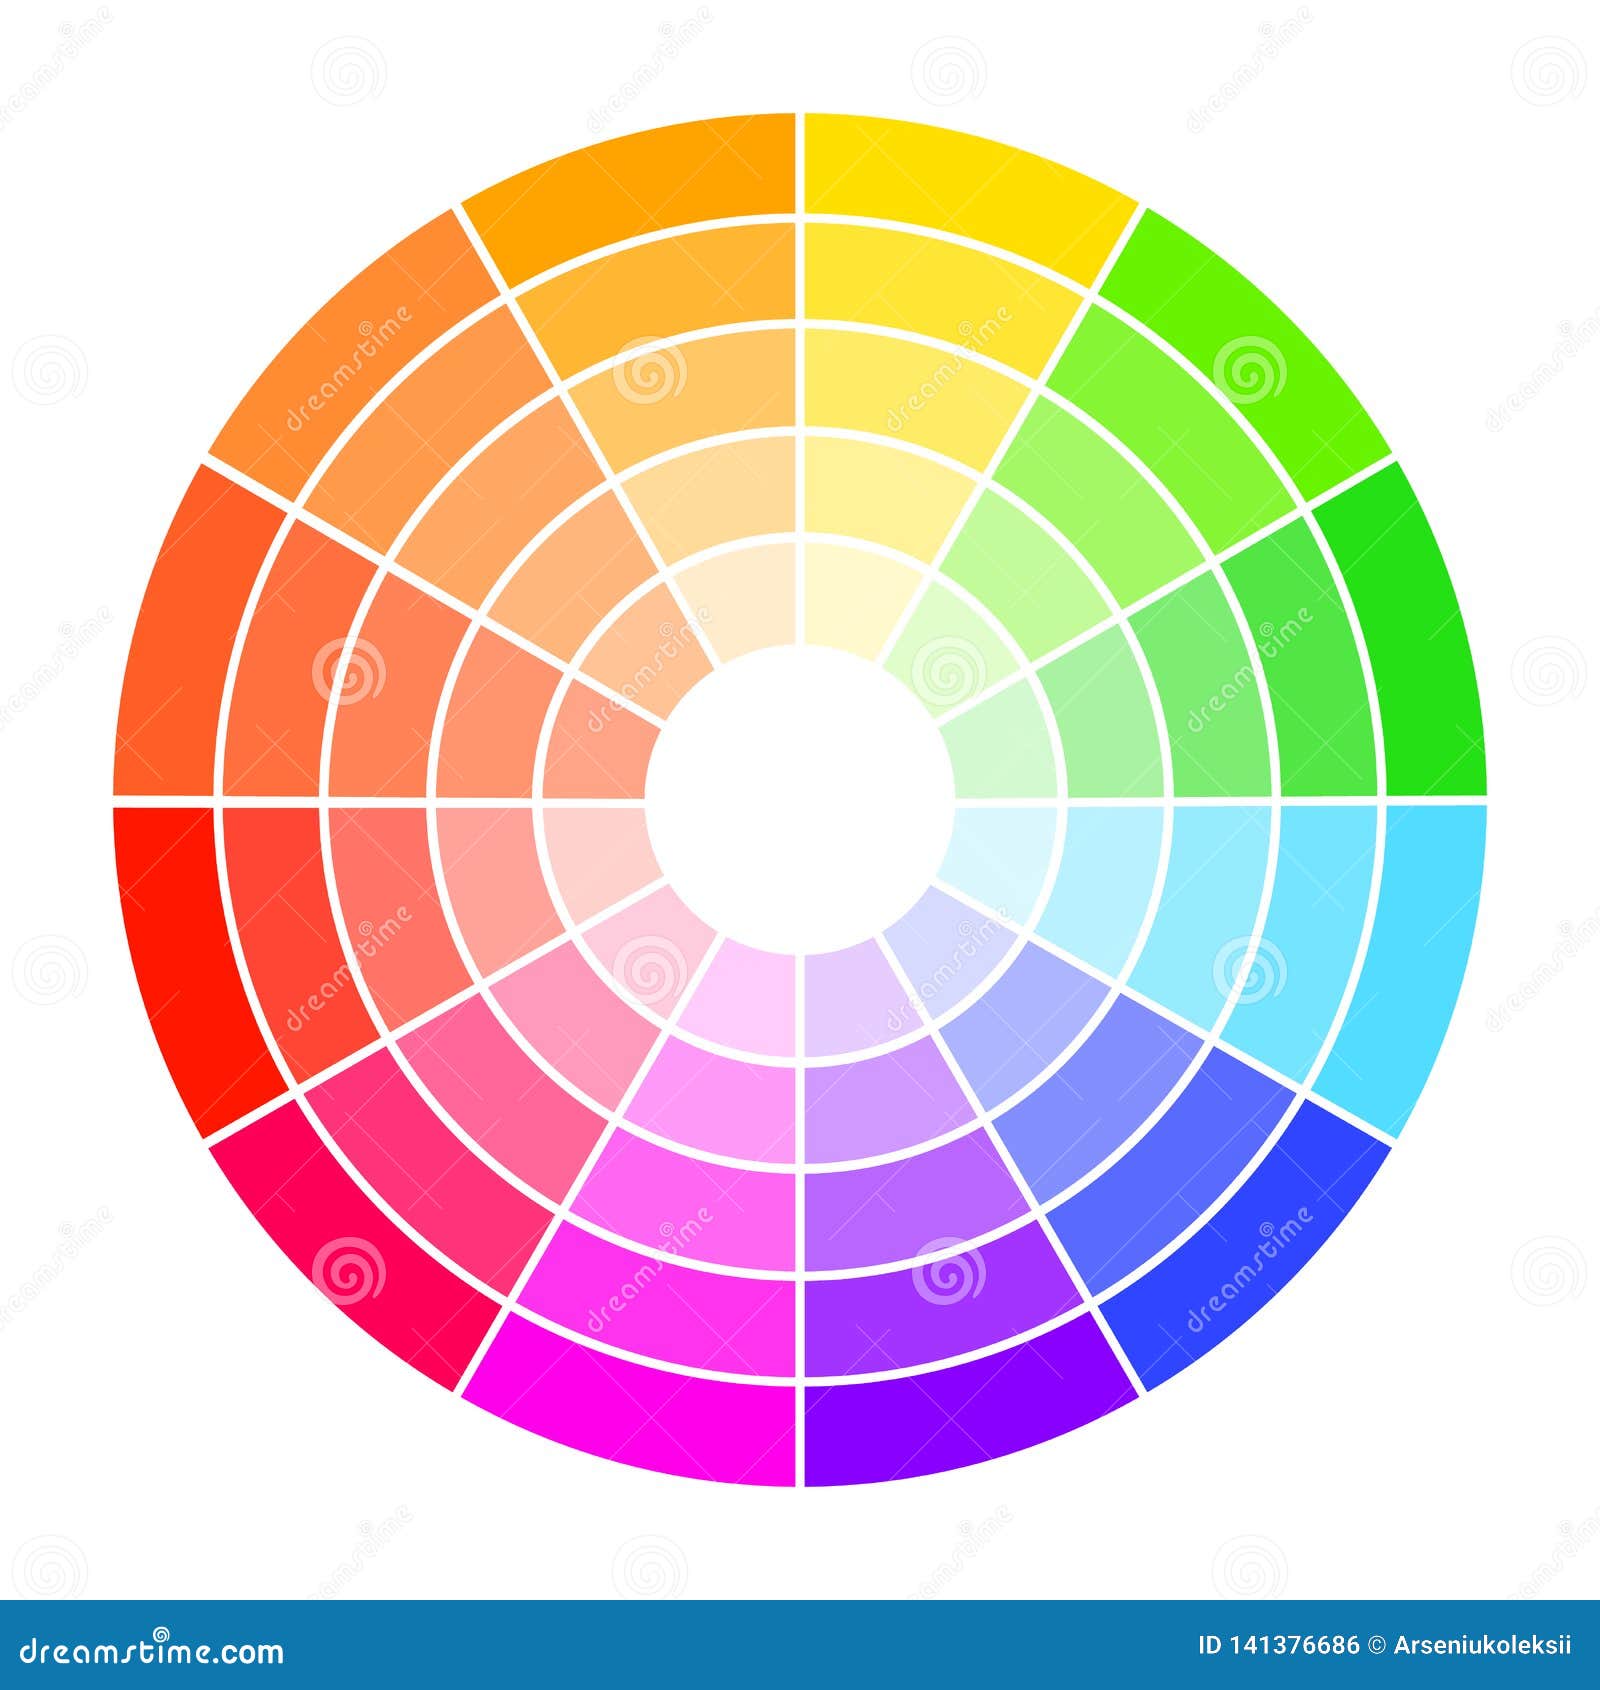 color wheel guide with saturation and highlight. colour picker assistant